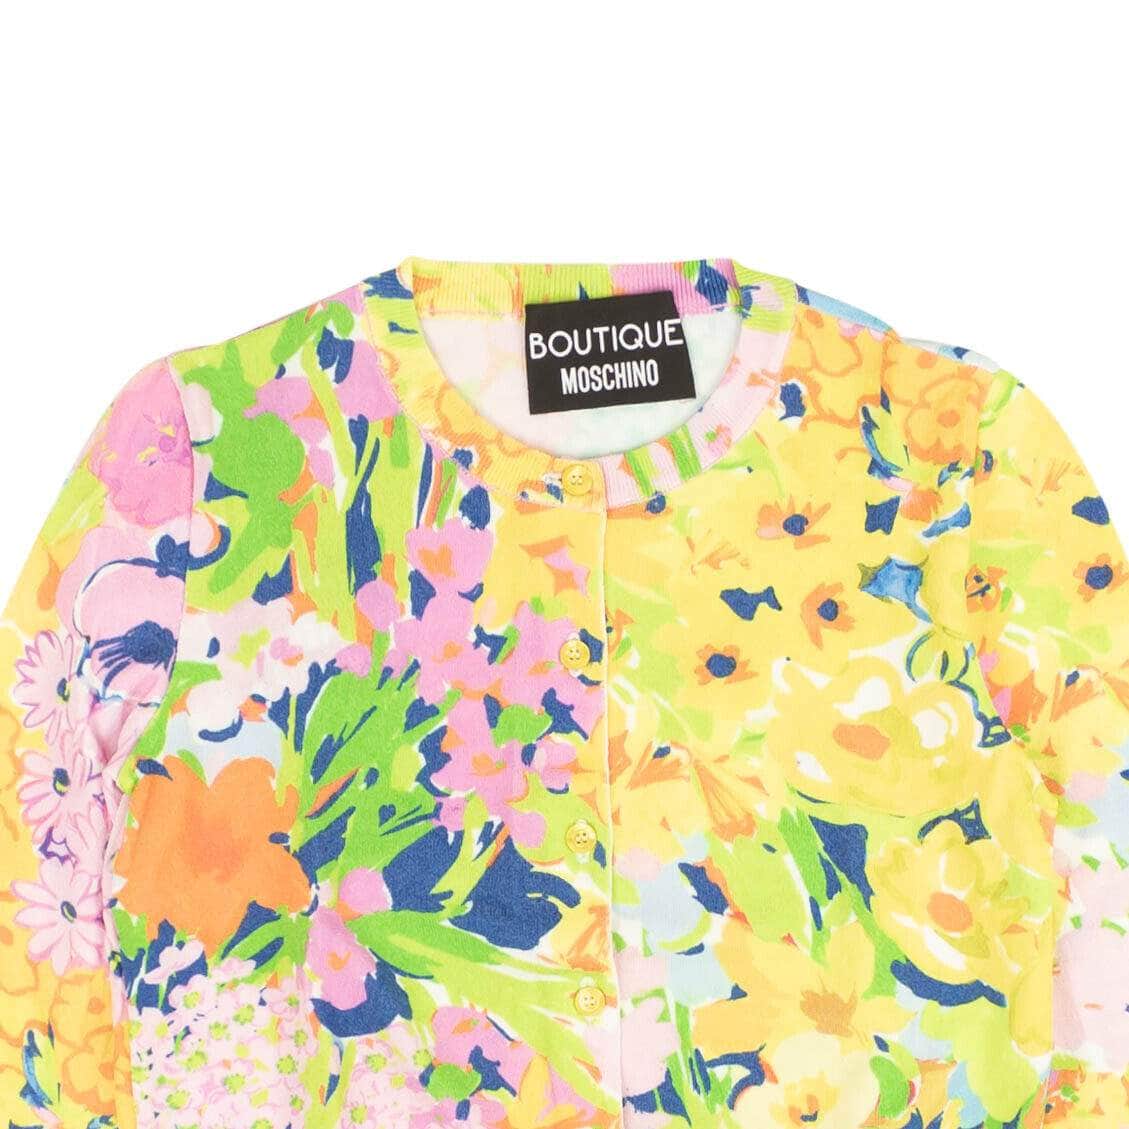 BOUTIQUE MOSCHINO boutique-moschino, channelenable-all, chicmi, couponcollection, gender-womens, main-clothing, size-36, size-38, size-40, under-250, womens-cardigans Multi Floral Print Cardigan